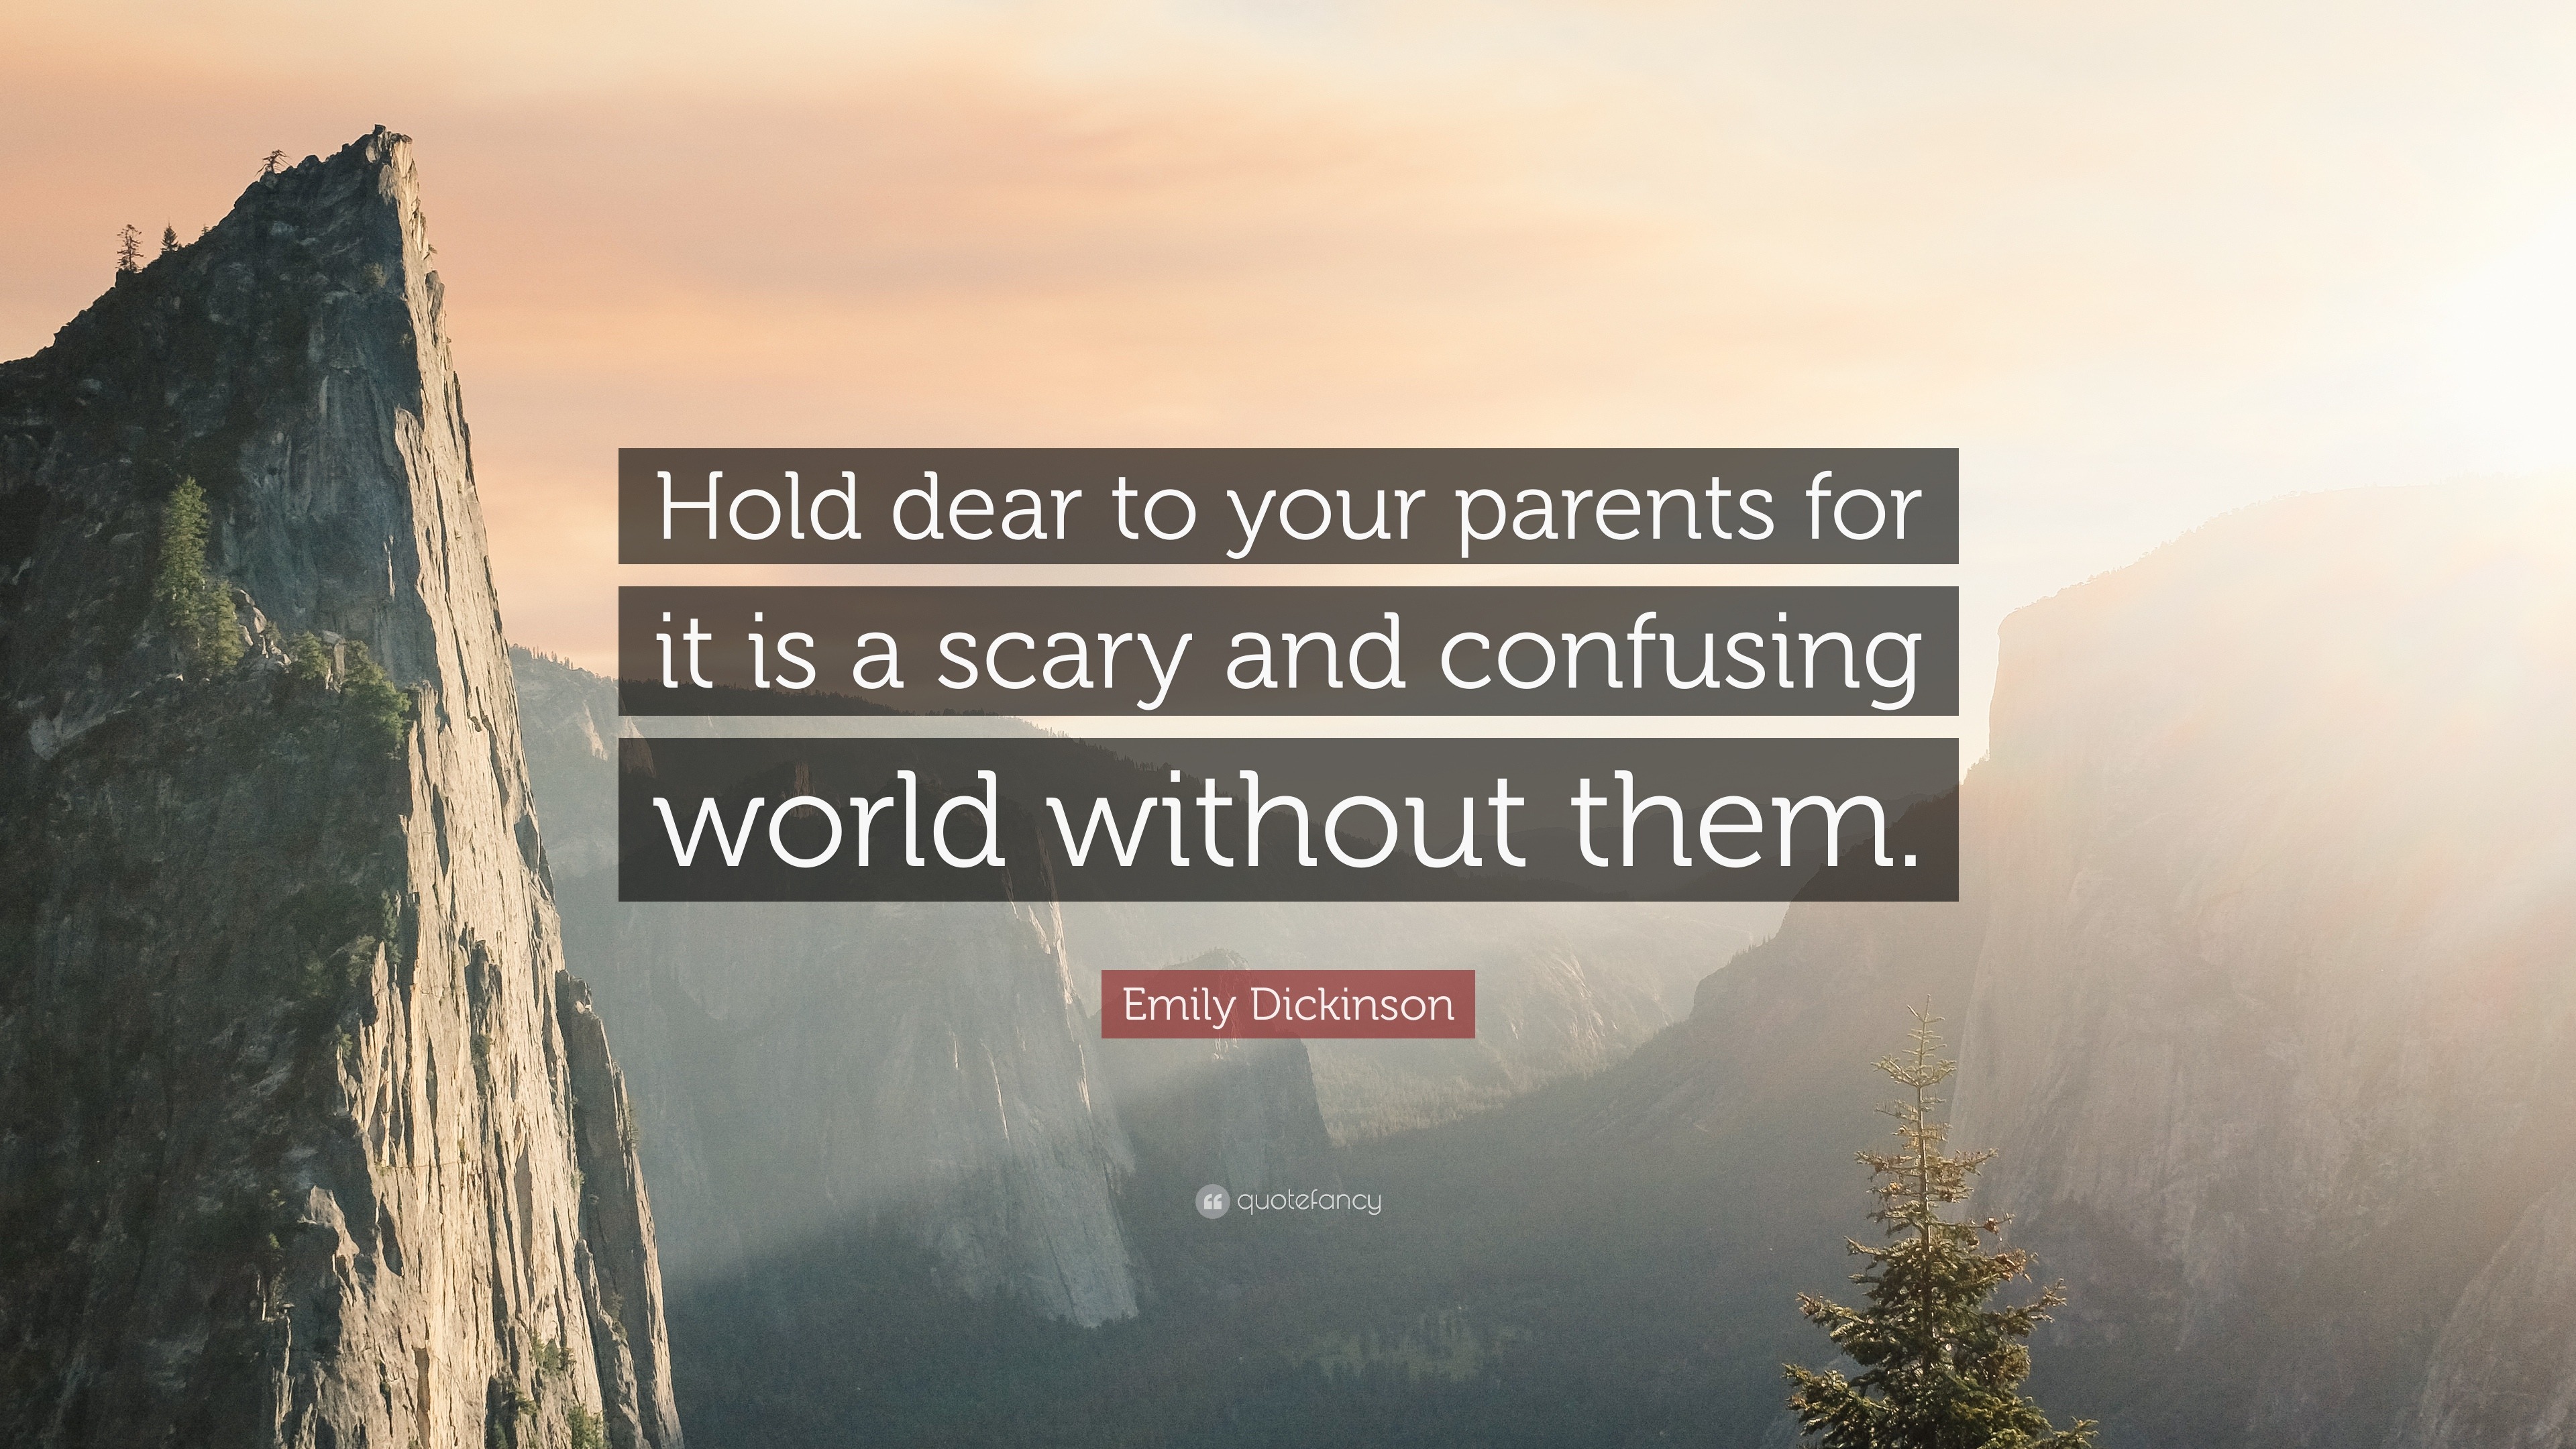 Emily Dickinson Quote: “Hold dear to your parents for it is a scary and